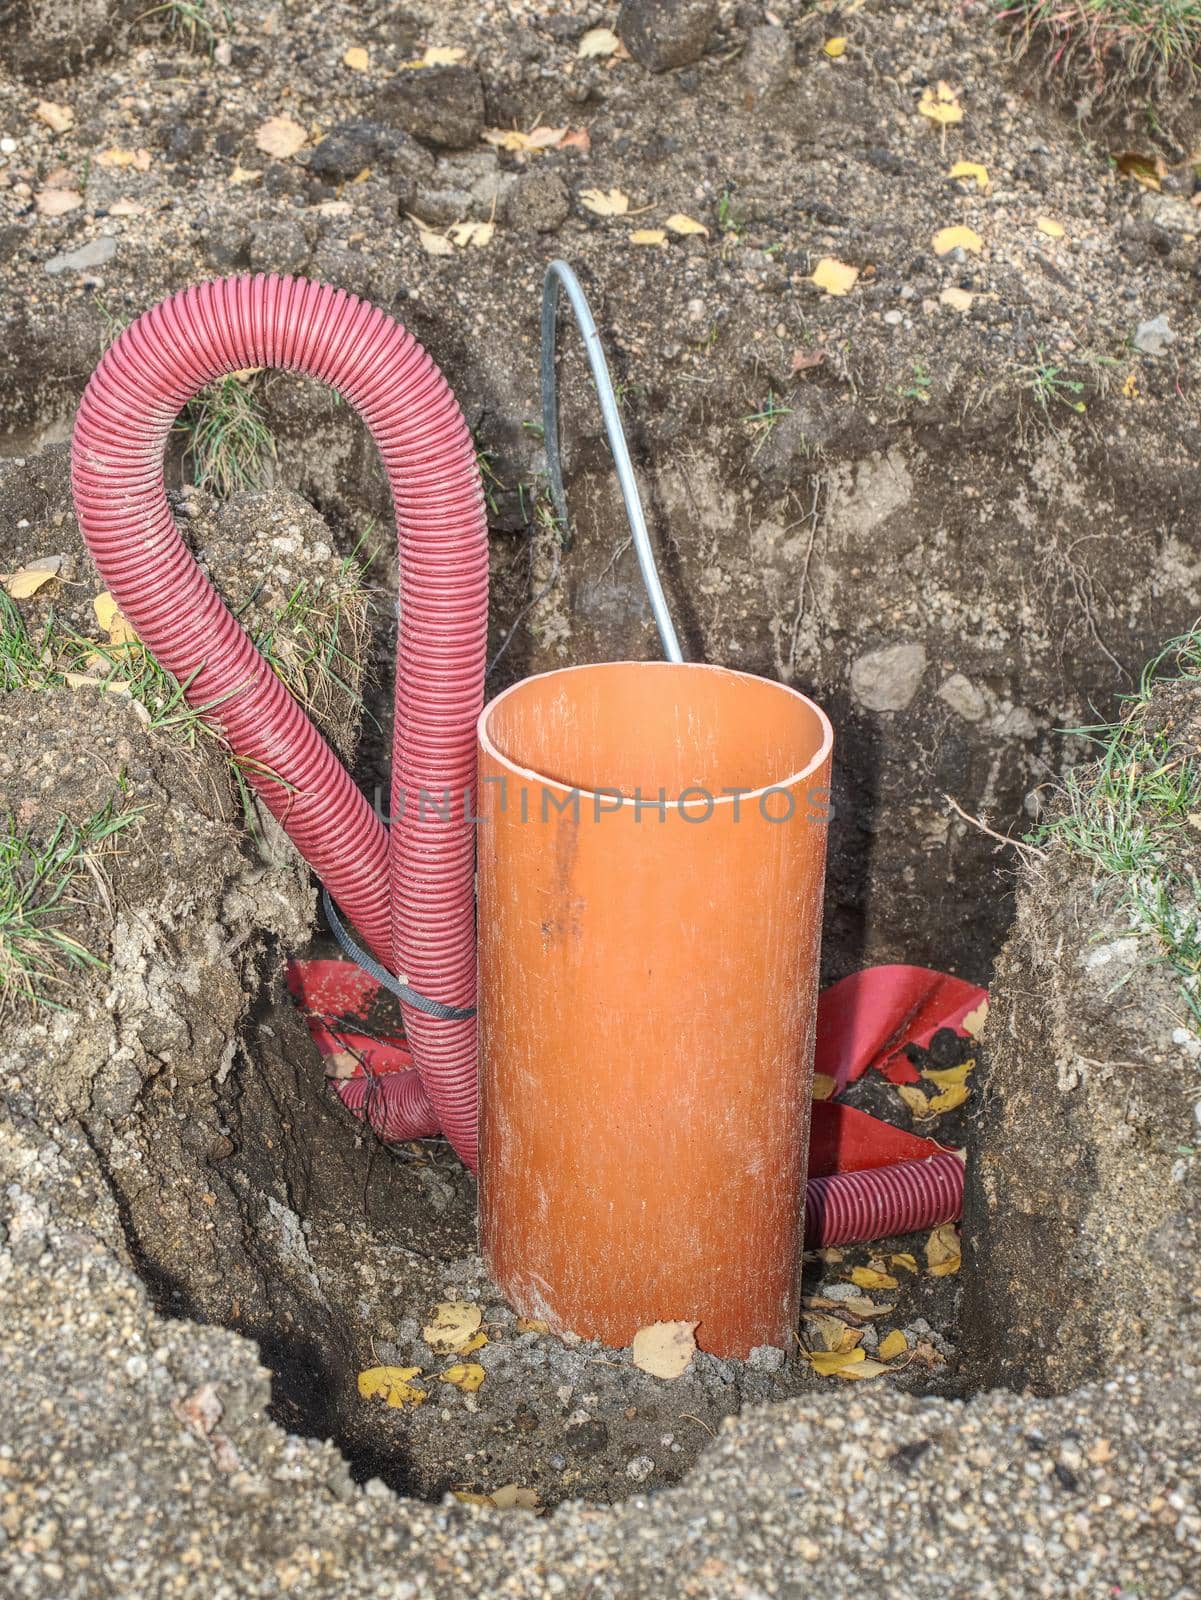 Ribbed red plastic pipes containing electric cables, repair work in the park